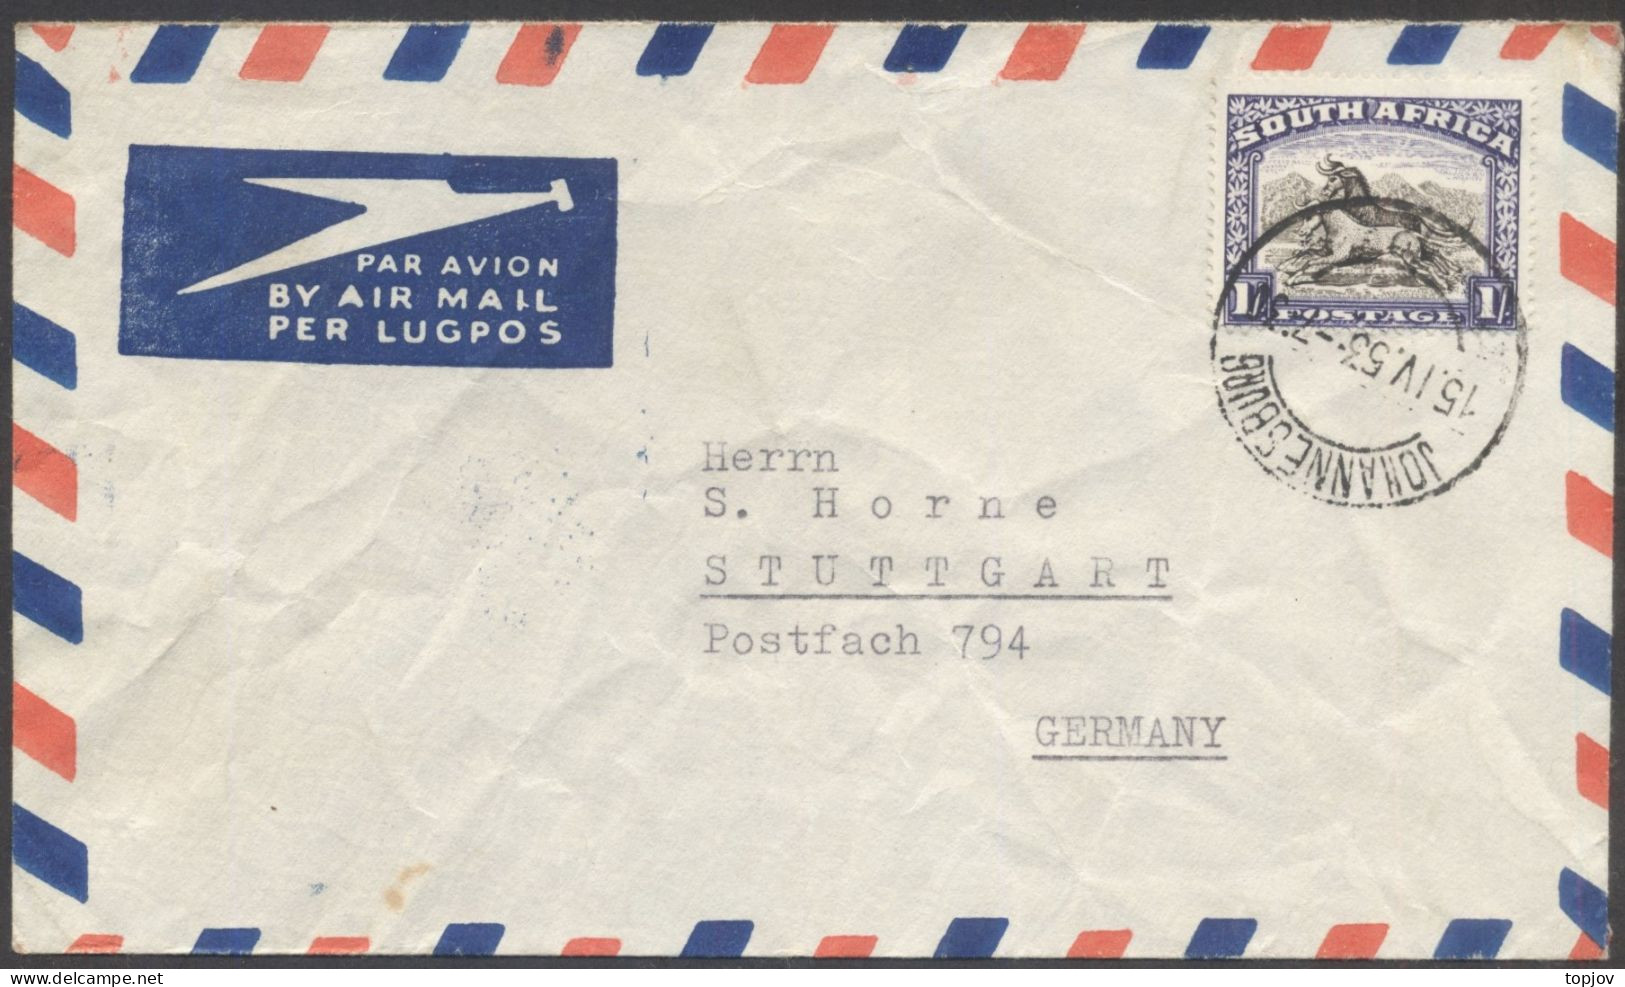 SOUTH AFRICA  RSA - JOHANNESBURG To GERMANY AIRMAIL - ANIMALS - 1953 - Luftpost